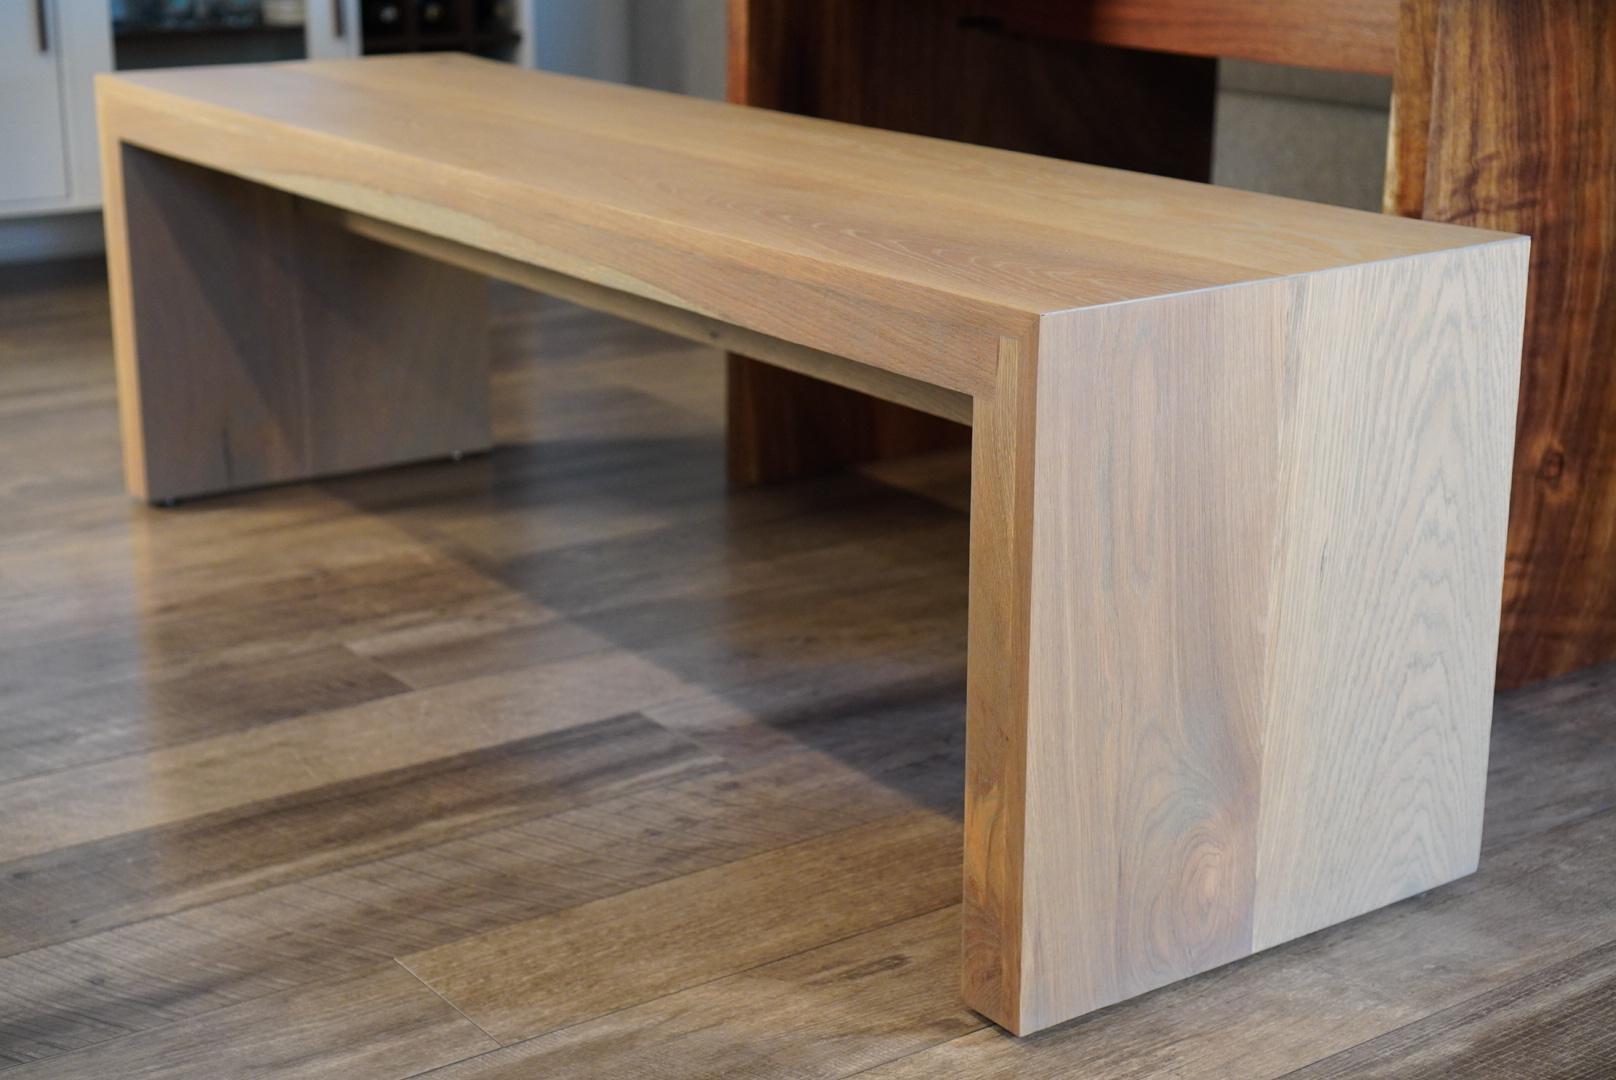 Introducing our 21st Century White Oak Bench, a versatile addition to any space, whether as a stylish dining bench or as welcoming entryway seating for your home or office. Handcrafted and meticulously finished in the exquisite Rubio Monokote Stone